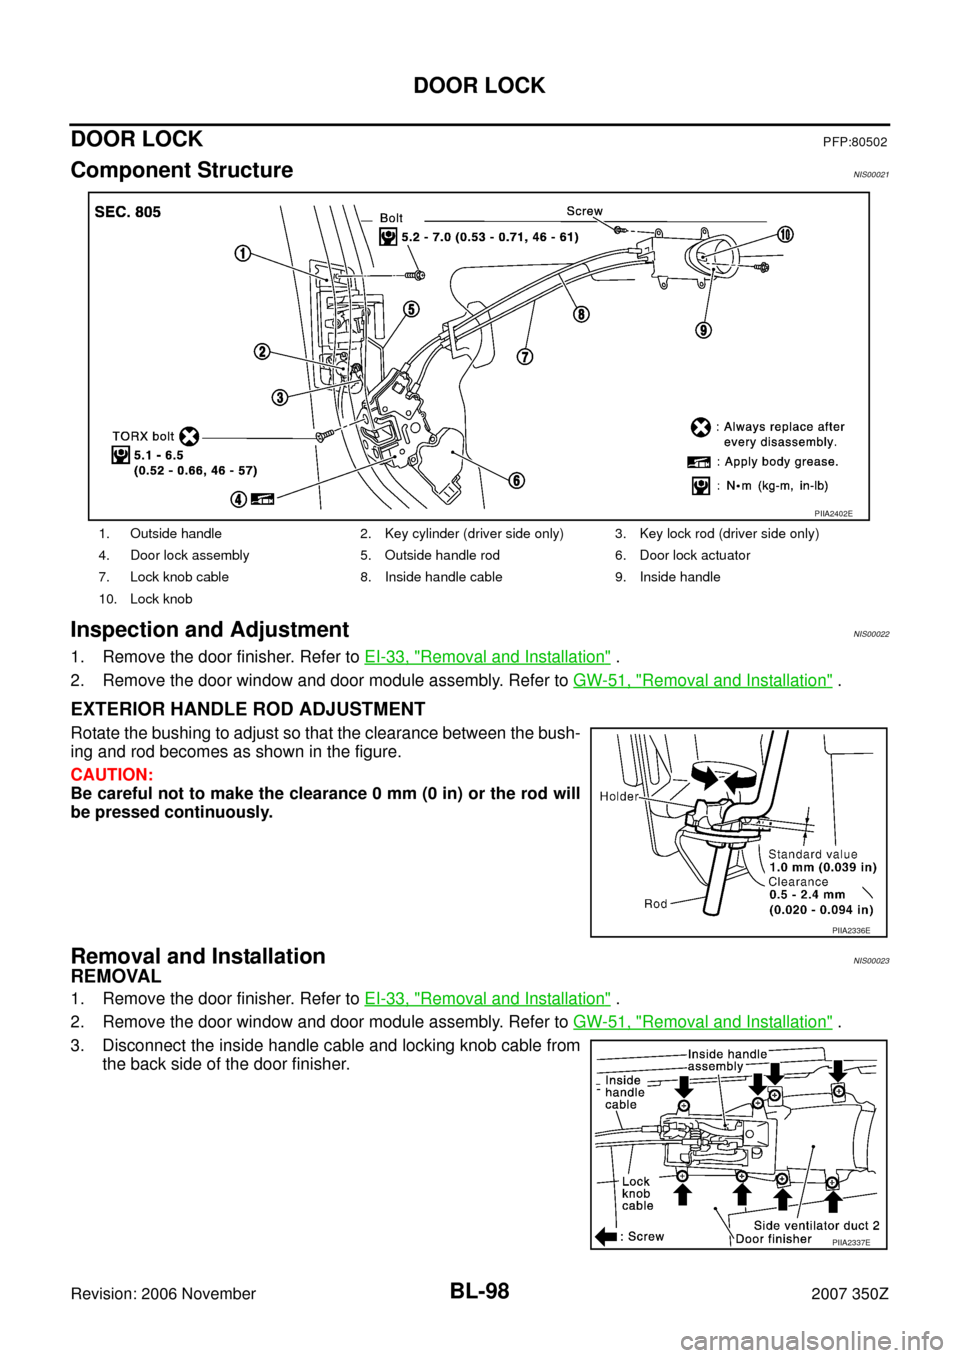 NISSAN 350Z 2007 Z33 Body, Lock And Security System Owners Manual BL-98
DOOR LOCK
Revision: 2006 November2007 350Z
DOOR LOCKPFP:80502
Component StructureNIS00021
Inspection and AdjustmentNIS00022
1. Remove the door finisher. Refer to EI-33, "Removal and Installation